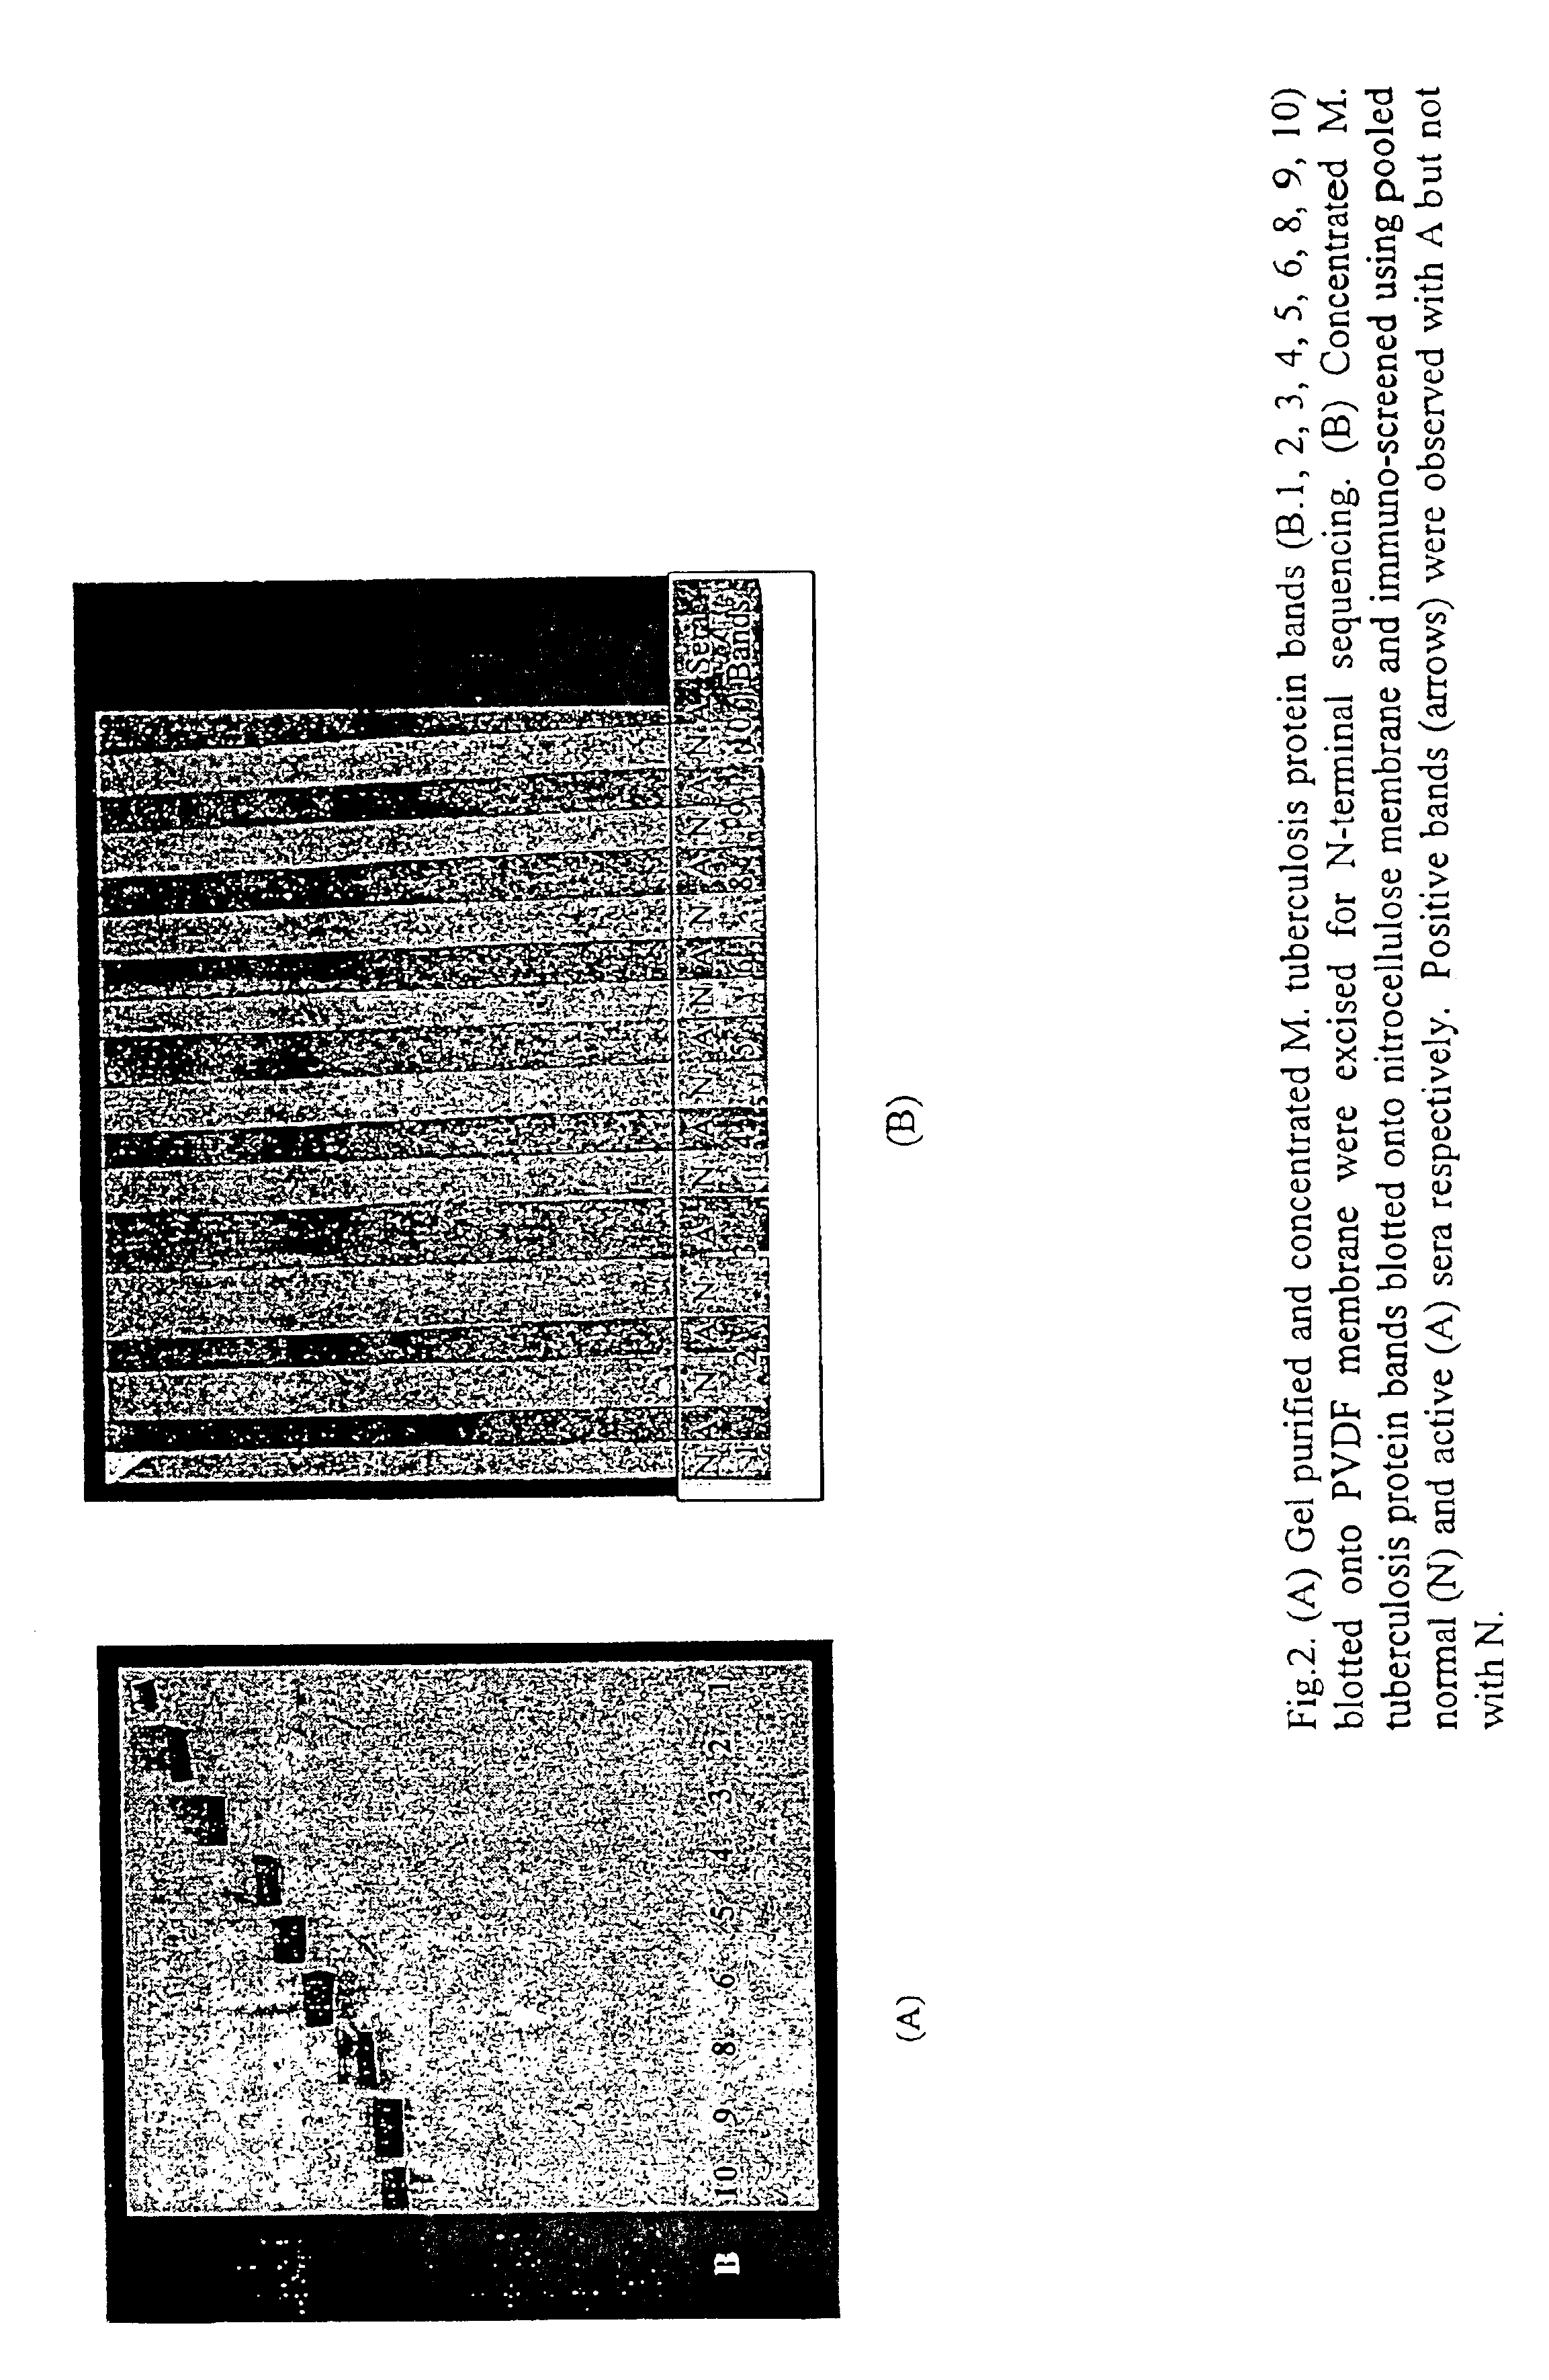 Bacterial-derived molecules and therapeutic and diagnostic uses therefor